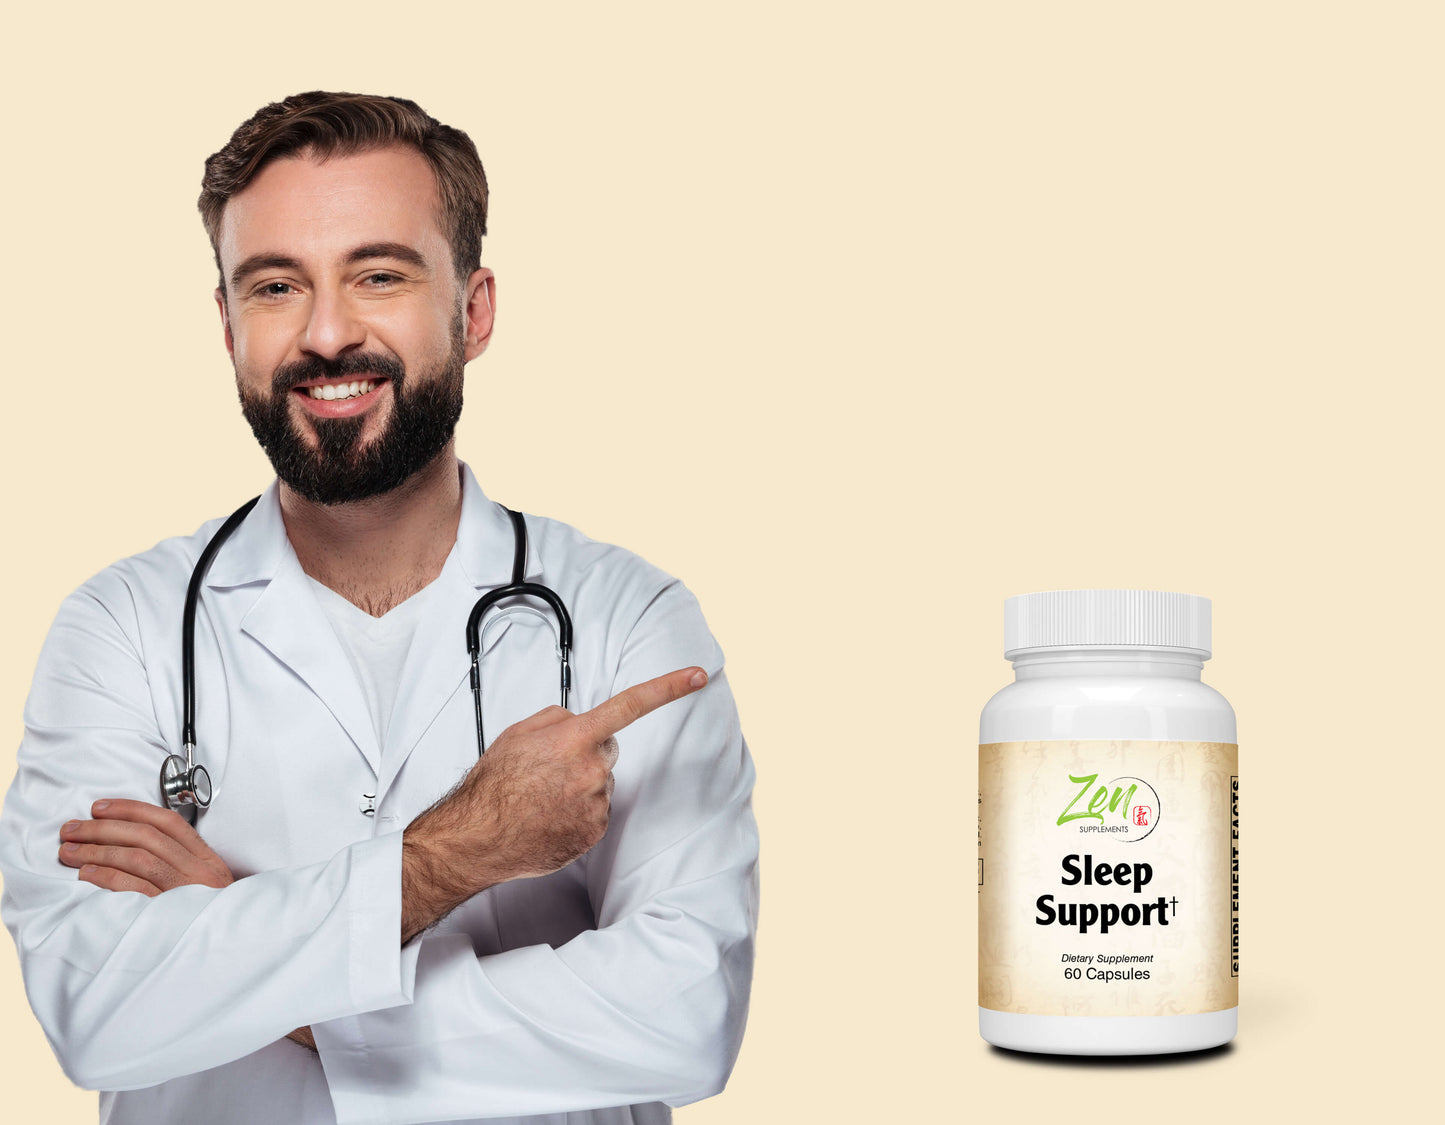 Sleep Support - With Melatonin, L-Theanine, Passionflower & Valerian - 60 Caps